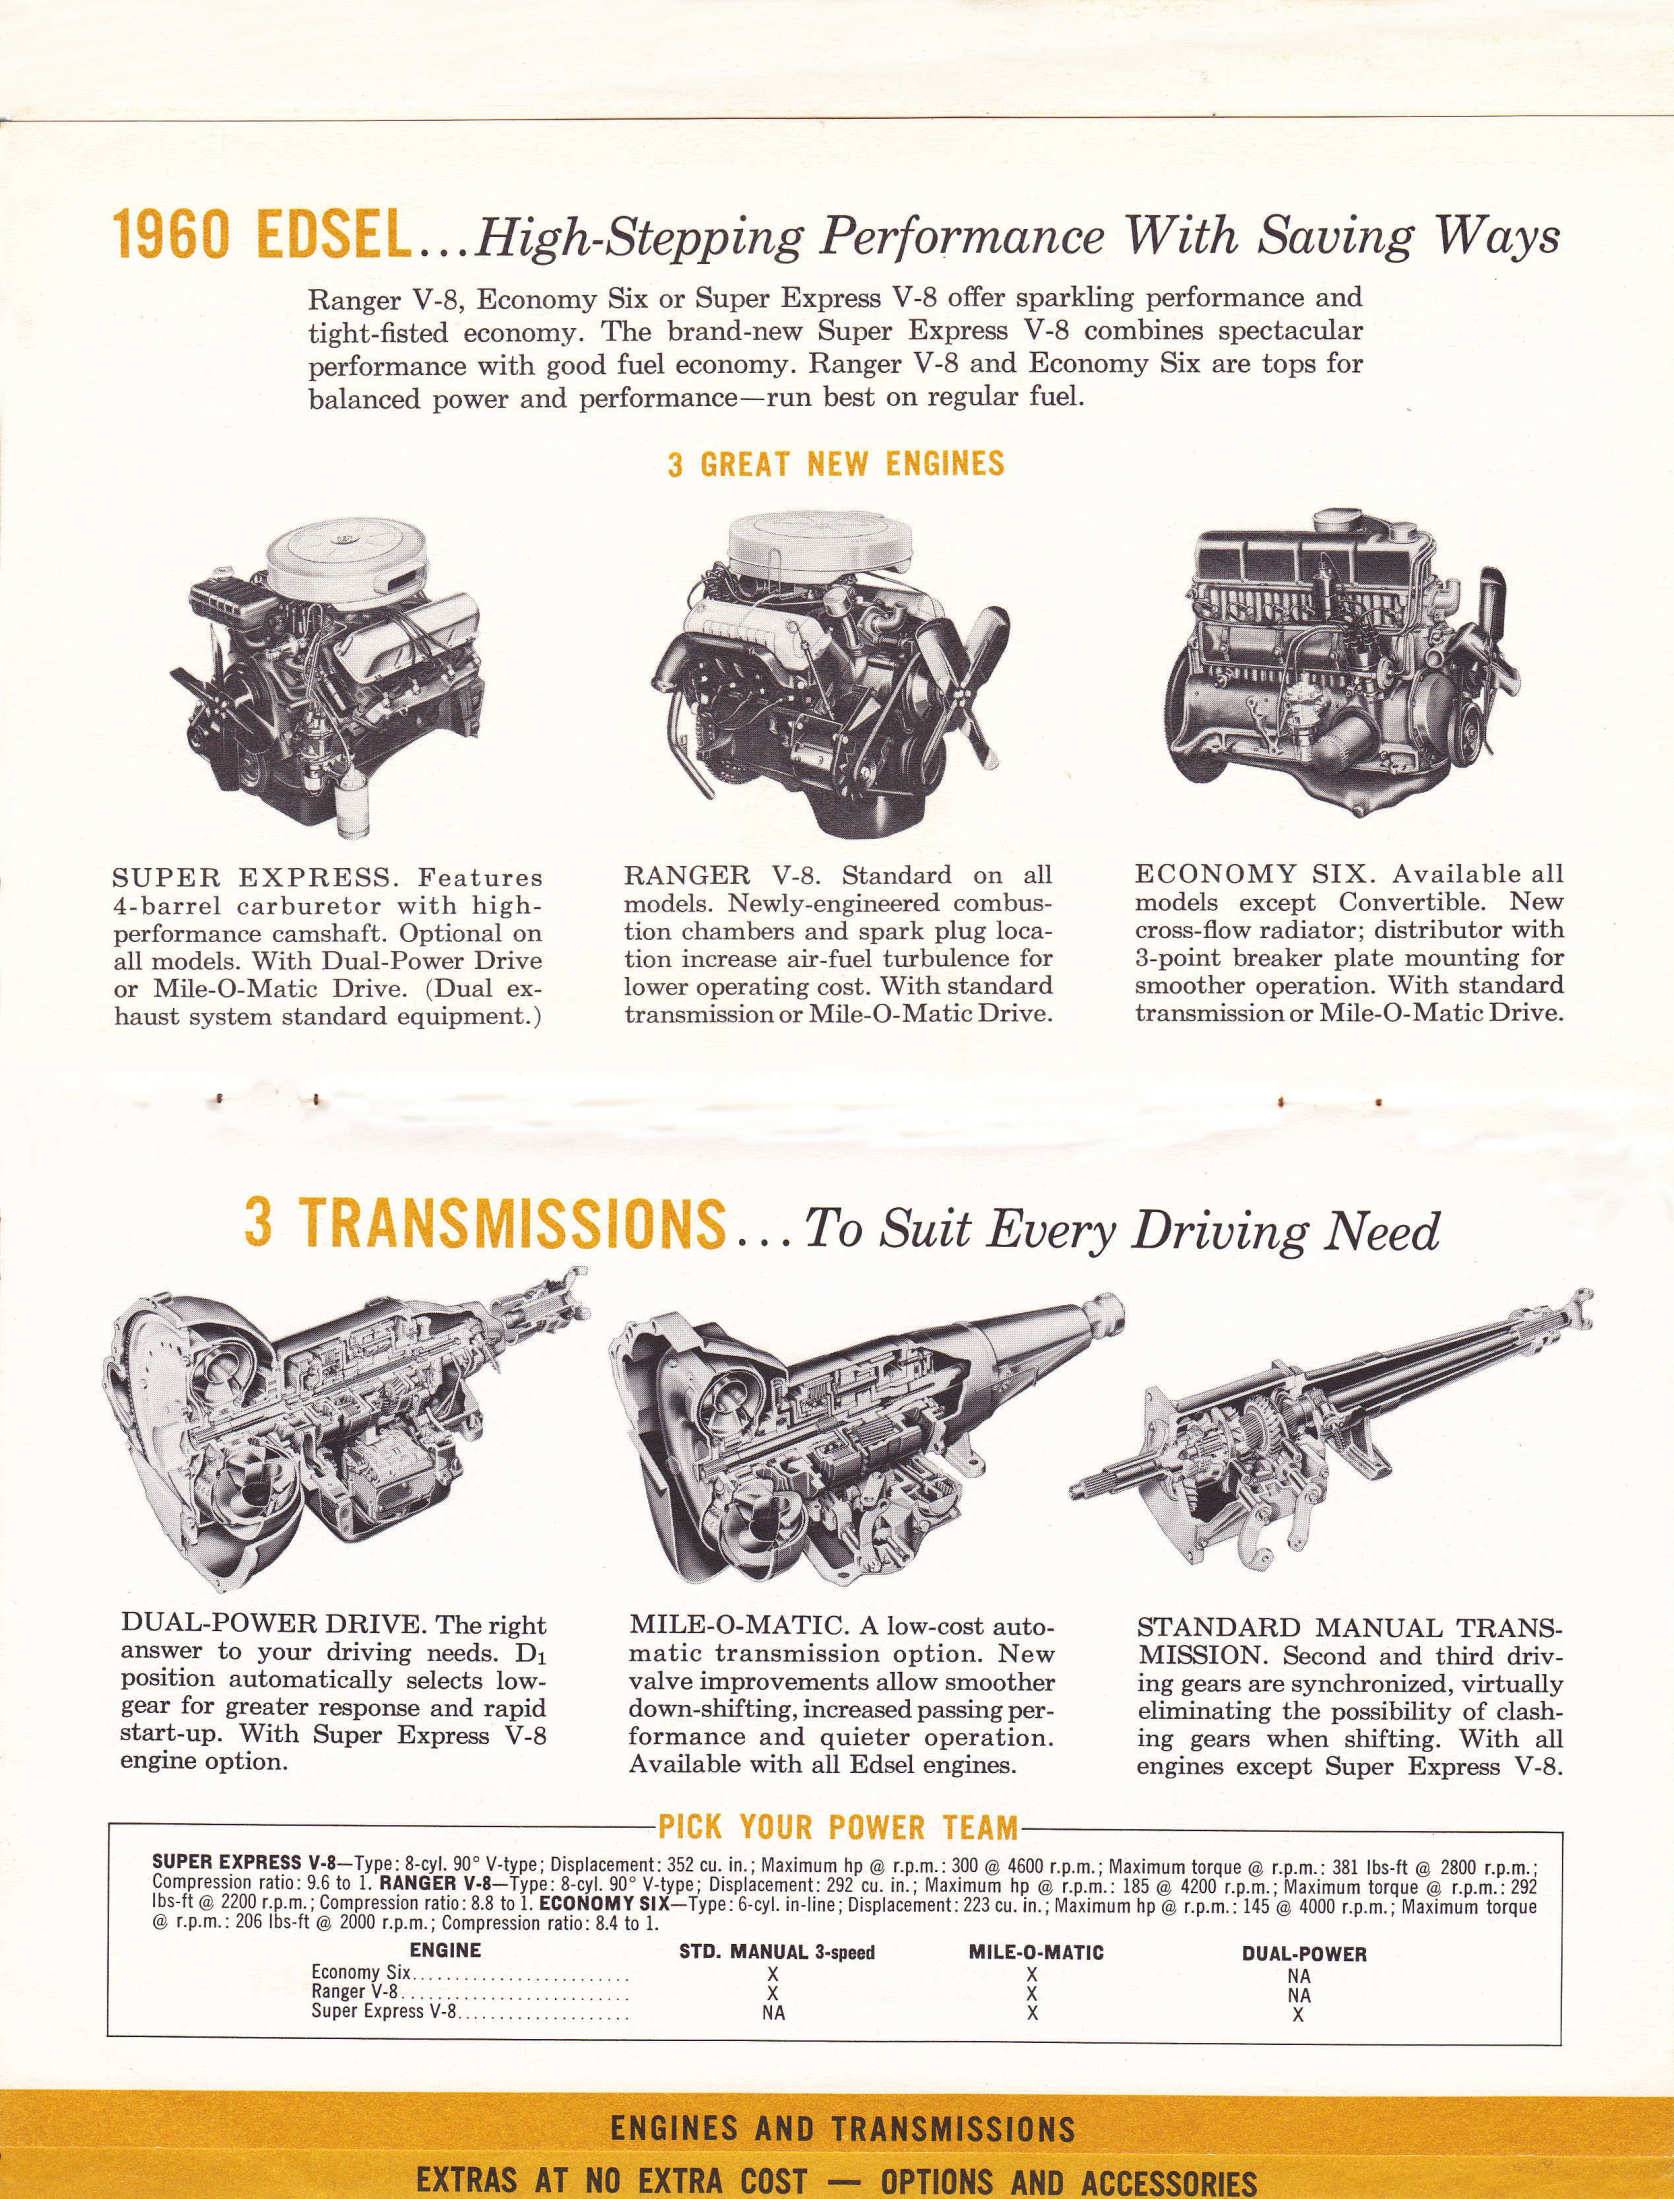 1960_Edsel_Quick_Facts_Booklet-12-13